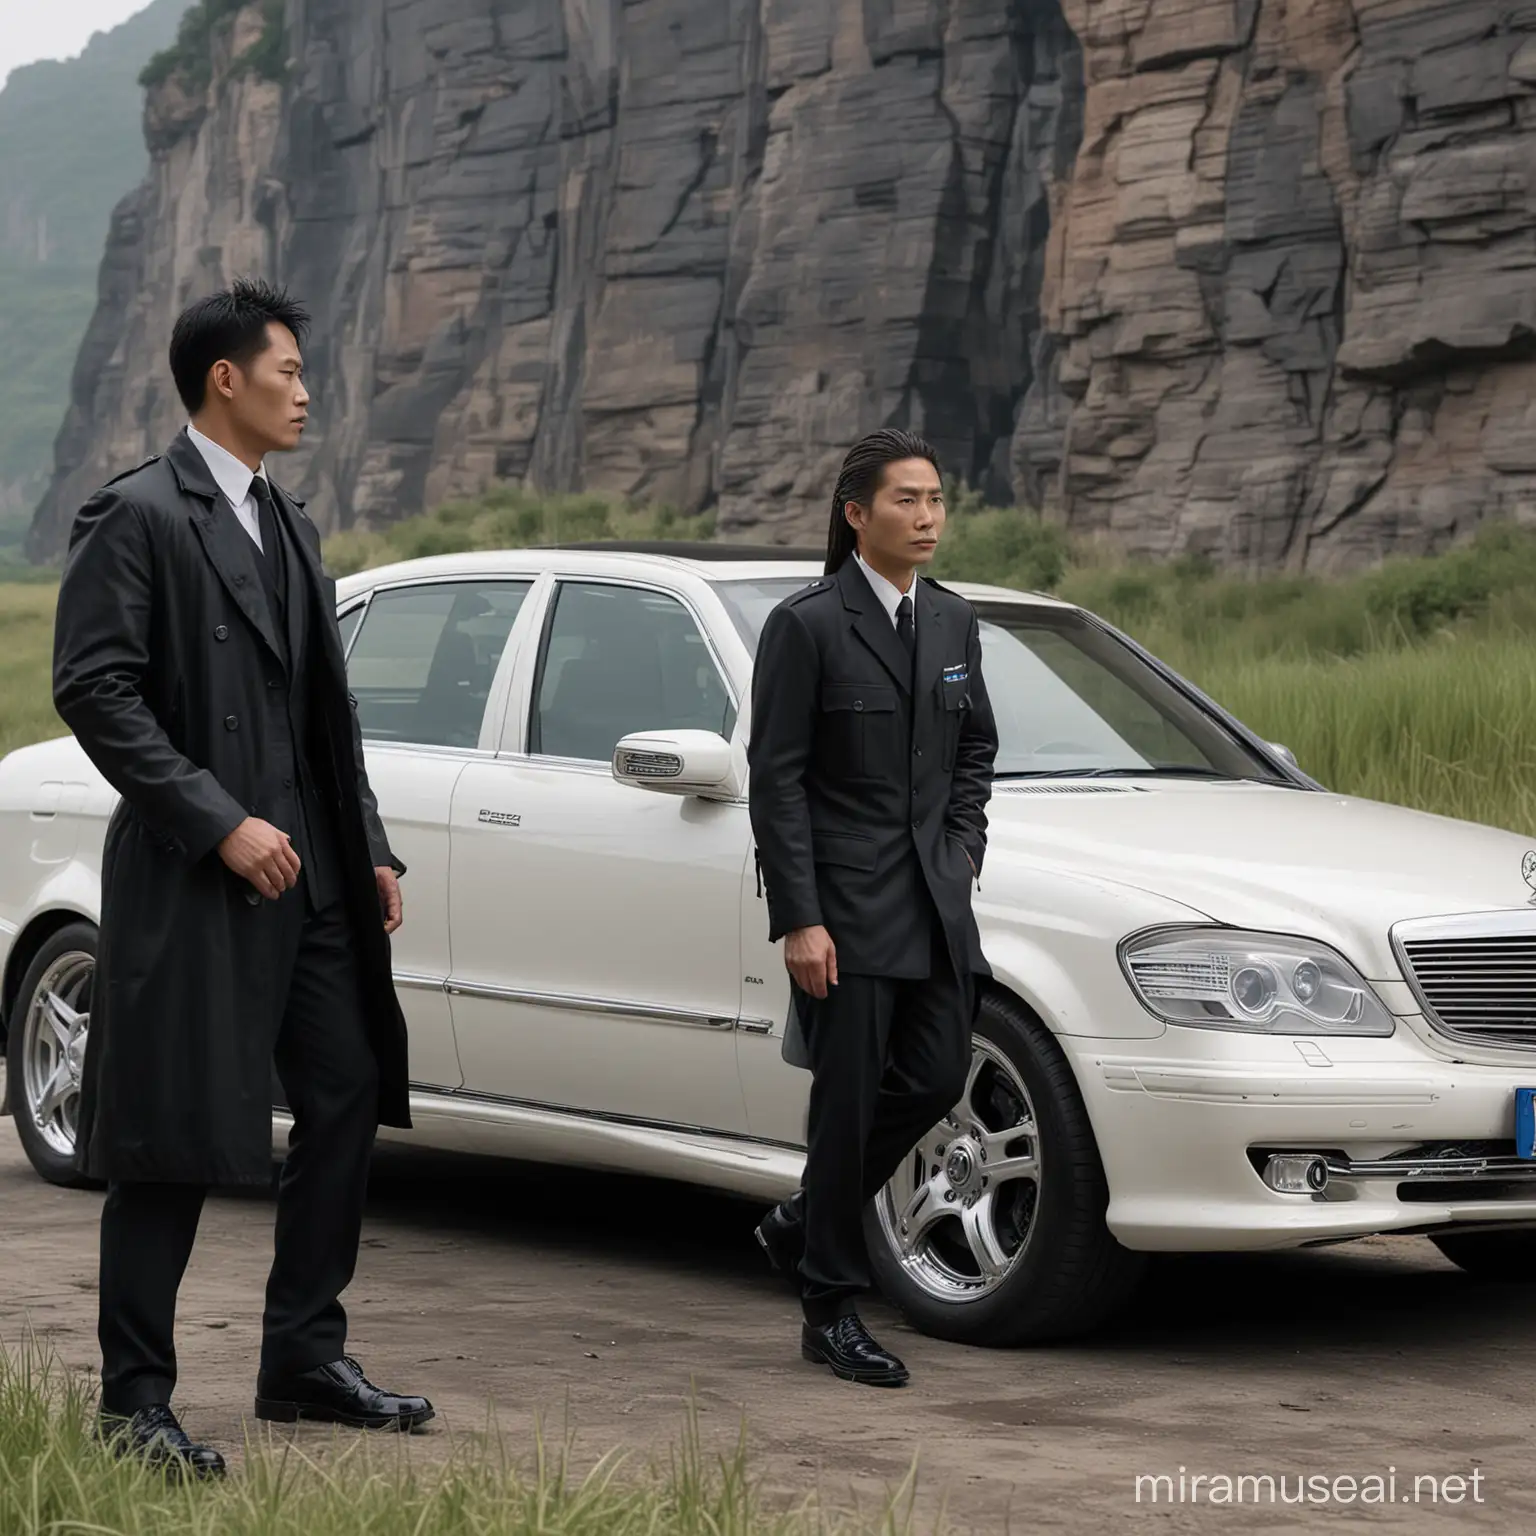 (best quality, 4k, highres, masterpiece:1, 5), ultra-detailed, photorealistic, side view of a whole whiten  Mercedes-Benz S600 Guard car, guarded by several people wearing black tactical clothing and holding M16 replicas, a handsome hongkong andylau  man aged 25, clean face with slightly long, dreadlocks hair parted in the middle, looking wrinkled and wet, wearing a black shirt, long black jacket, formal trousers, and formal shoes, walking and holding a Black M16 pointed at the camera, dense daytime atmosphere on a higher grass cliff, ground-level view, STYLIZE 1000 --ar 16:9 --v 5 --s 250